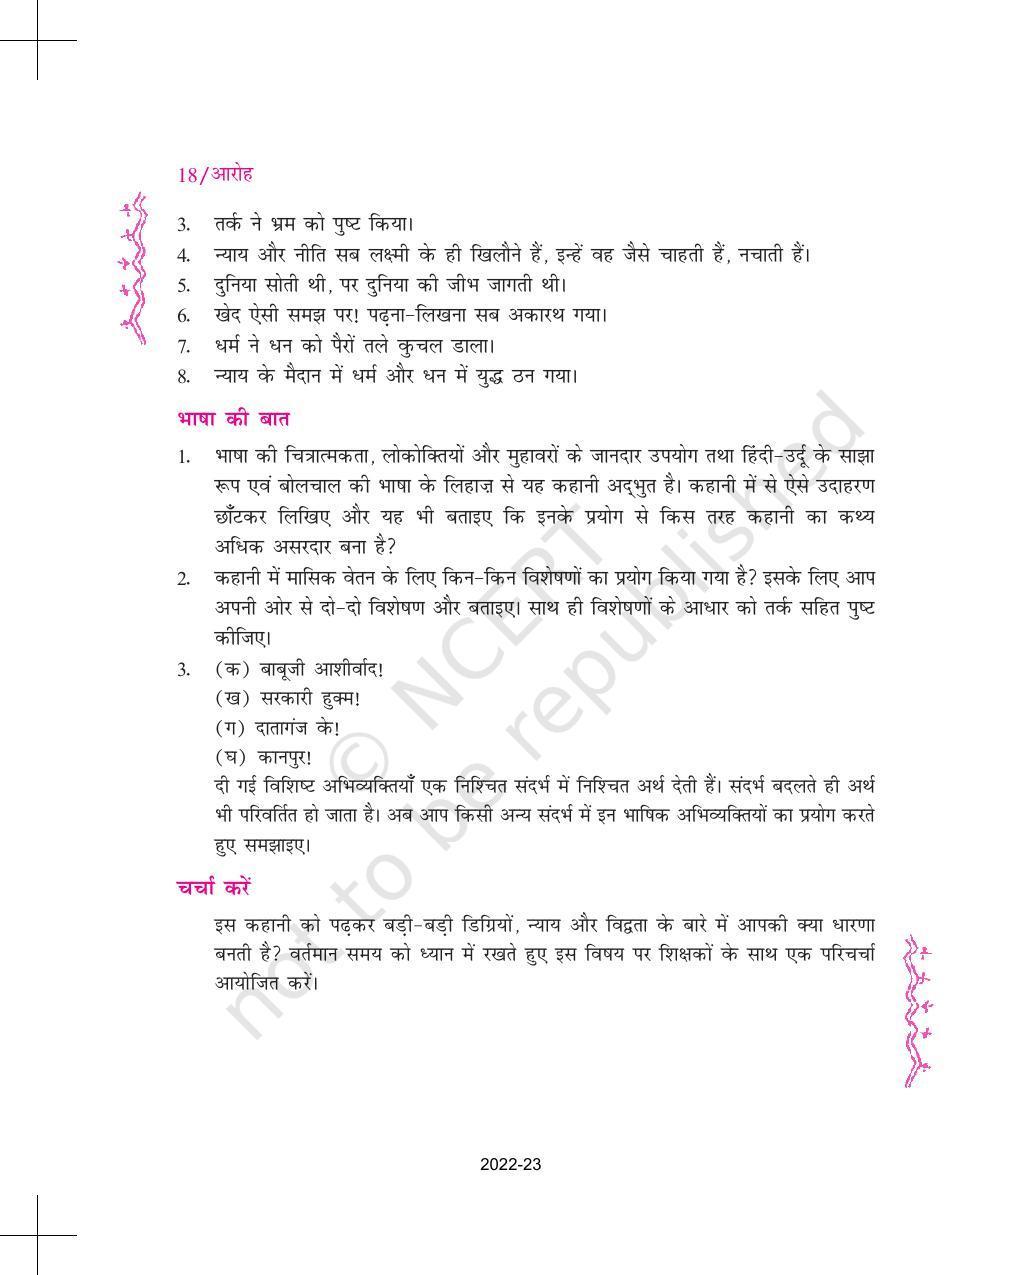 NCERT Book for Class 11 Hindi Aroh Chapter 1 नमक का दारोगा - Page 18